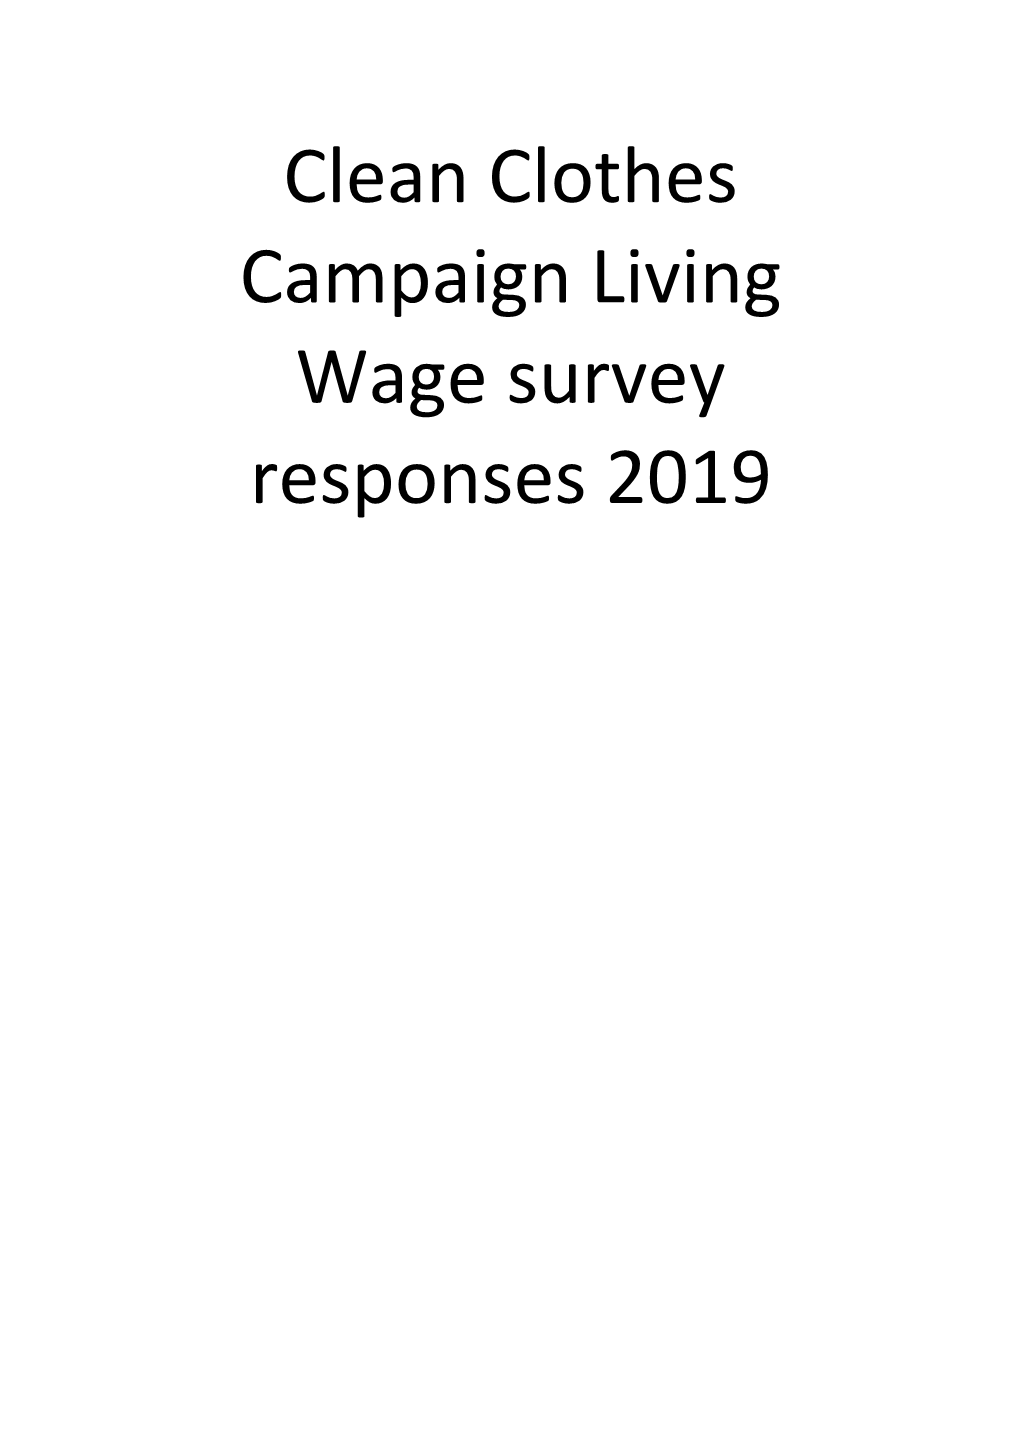 Clean Clothes Campaign Living Wage Survey Responses 2019